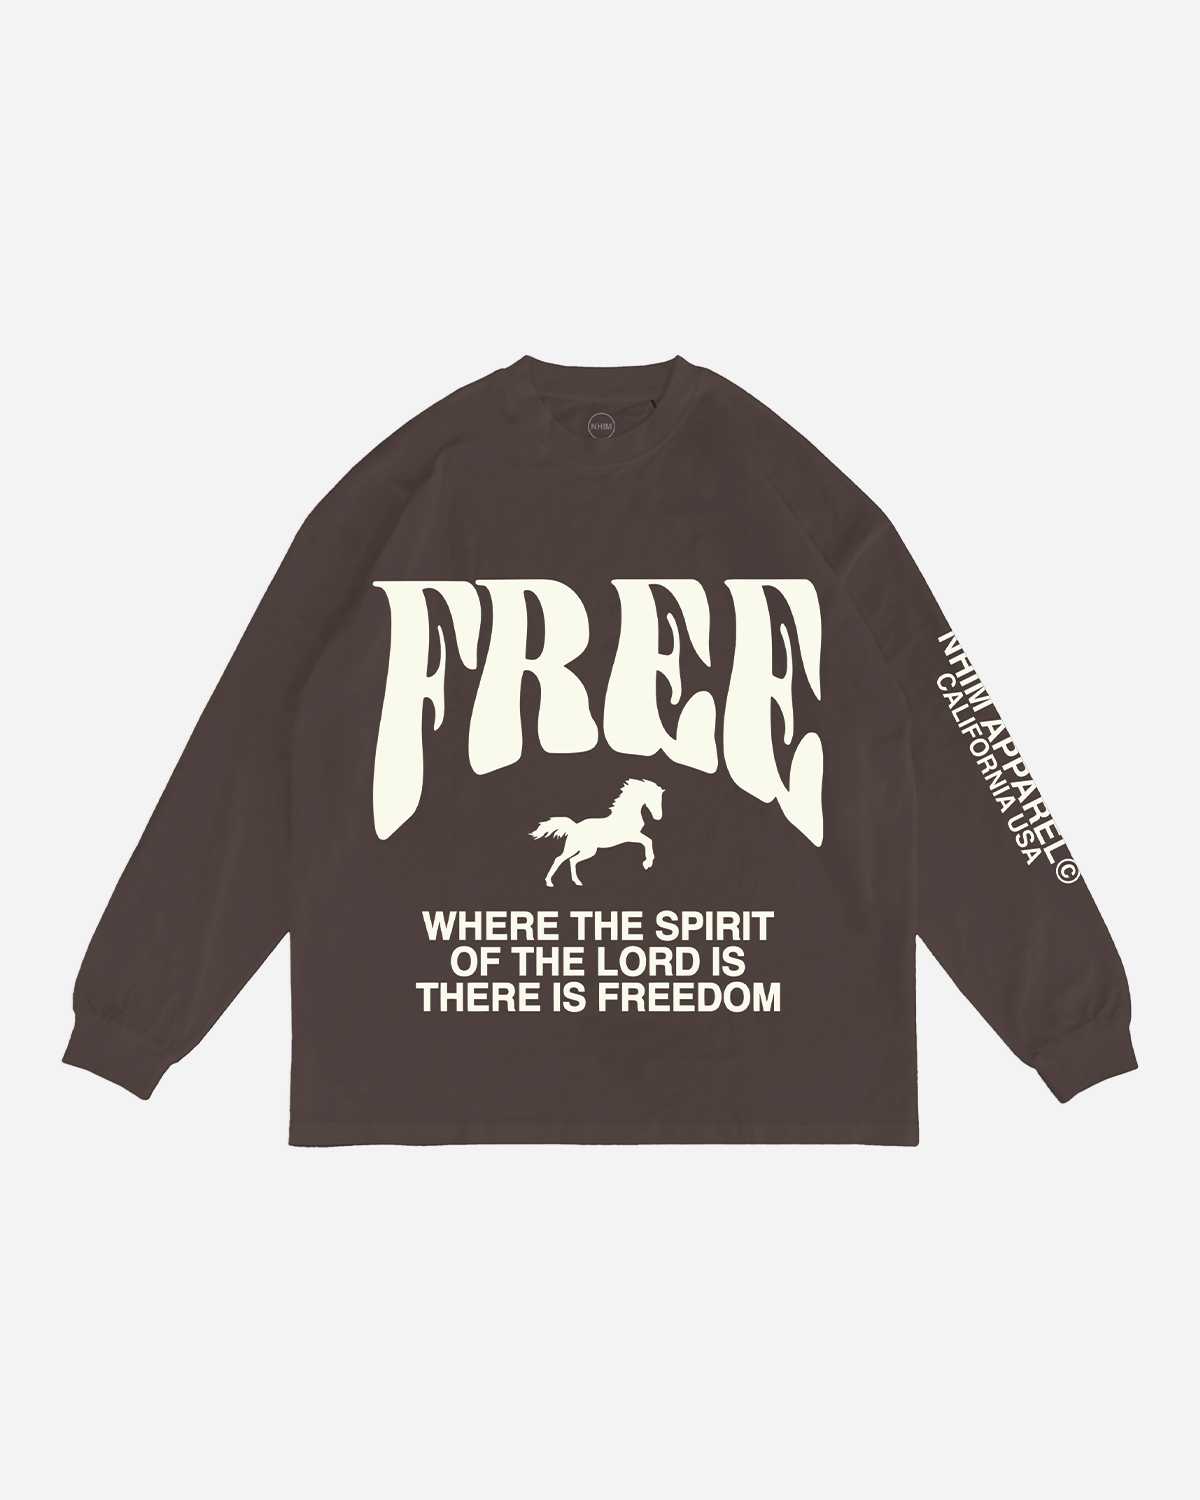 Christian long-sleeve shirt - where the Spirit of the Lord is there is freedom - FREE